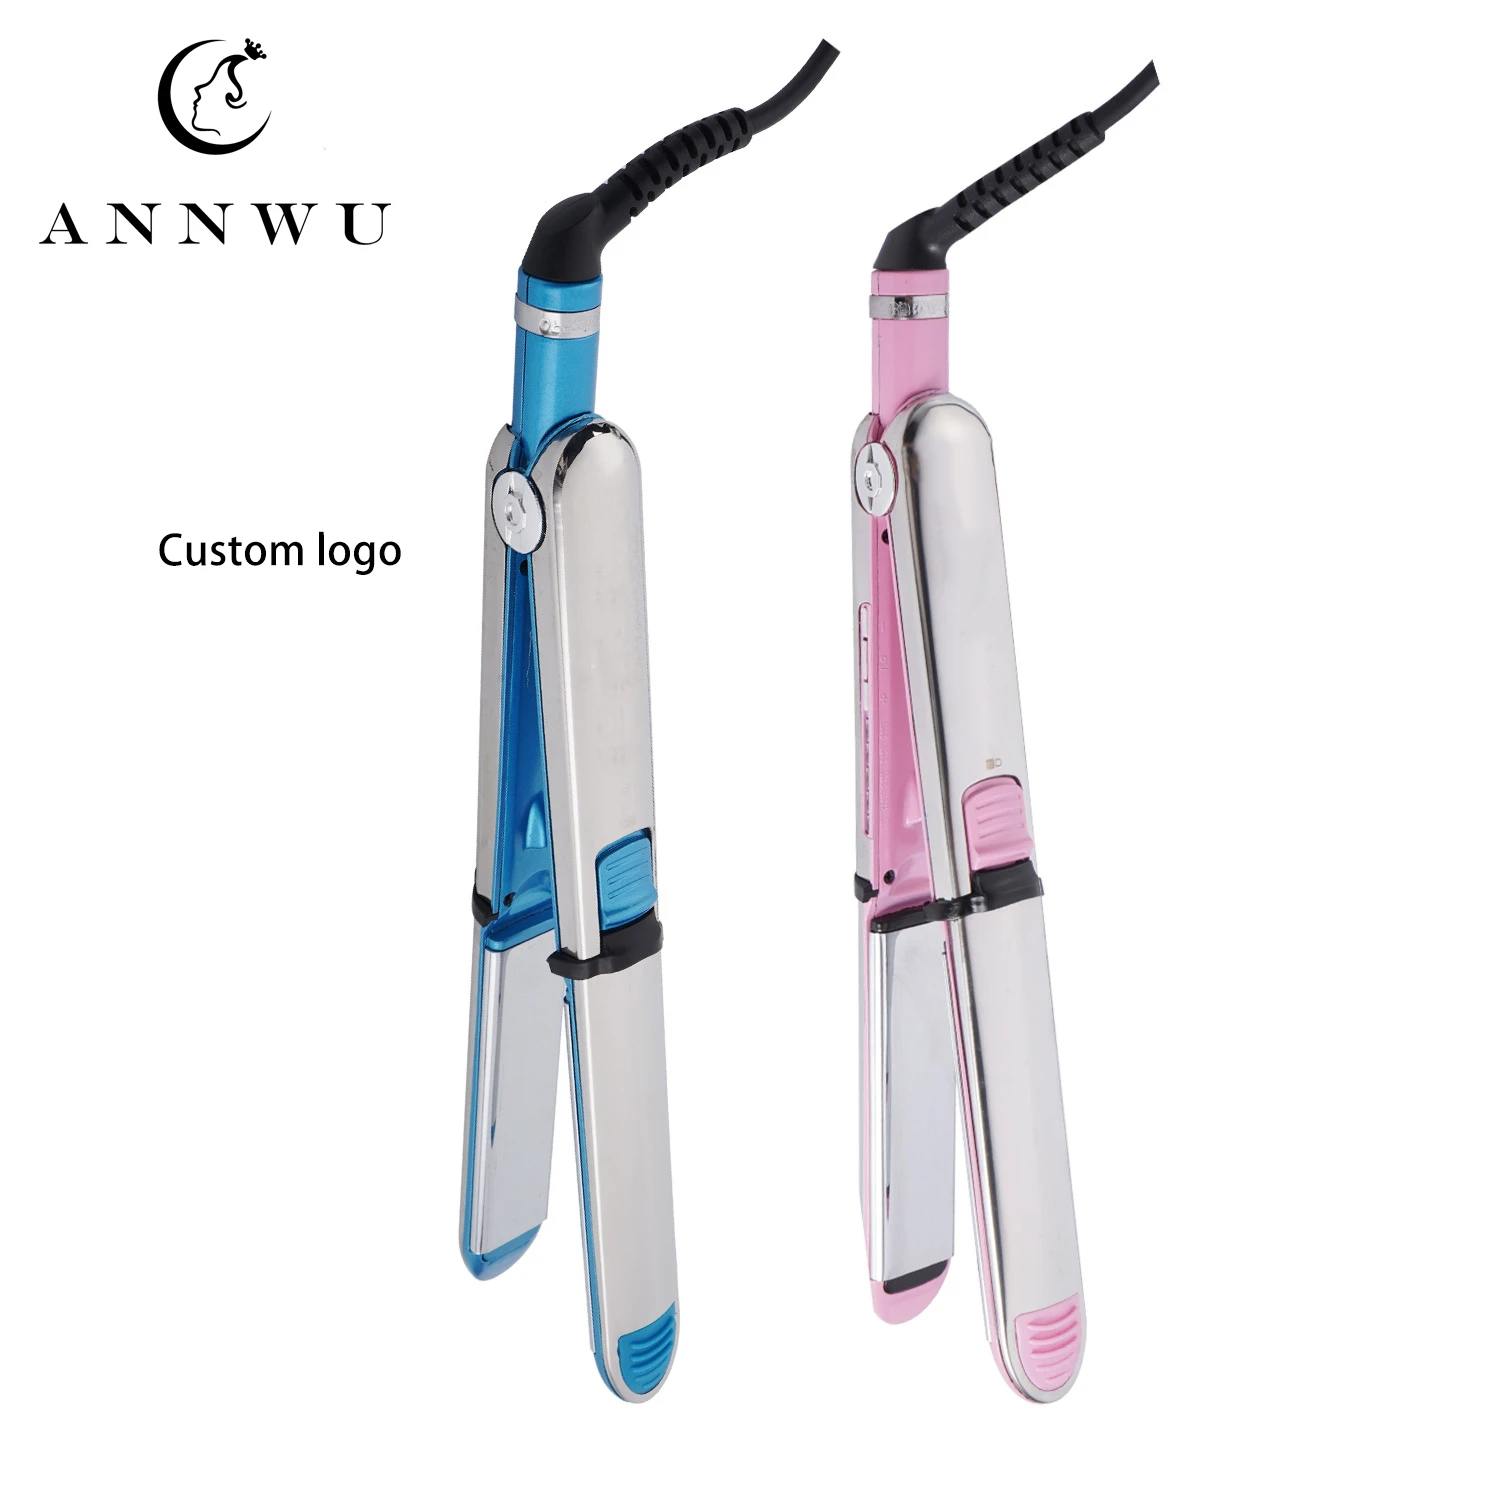 AnnWu Professional private label stainless steel hair straightener and fast heating flat iron custom logo